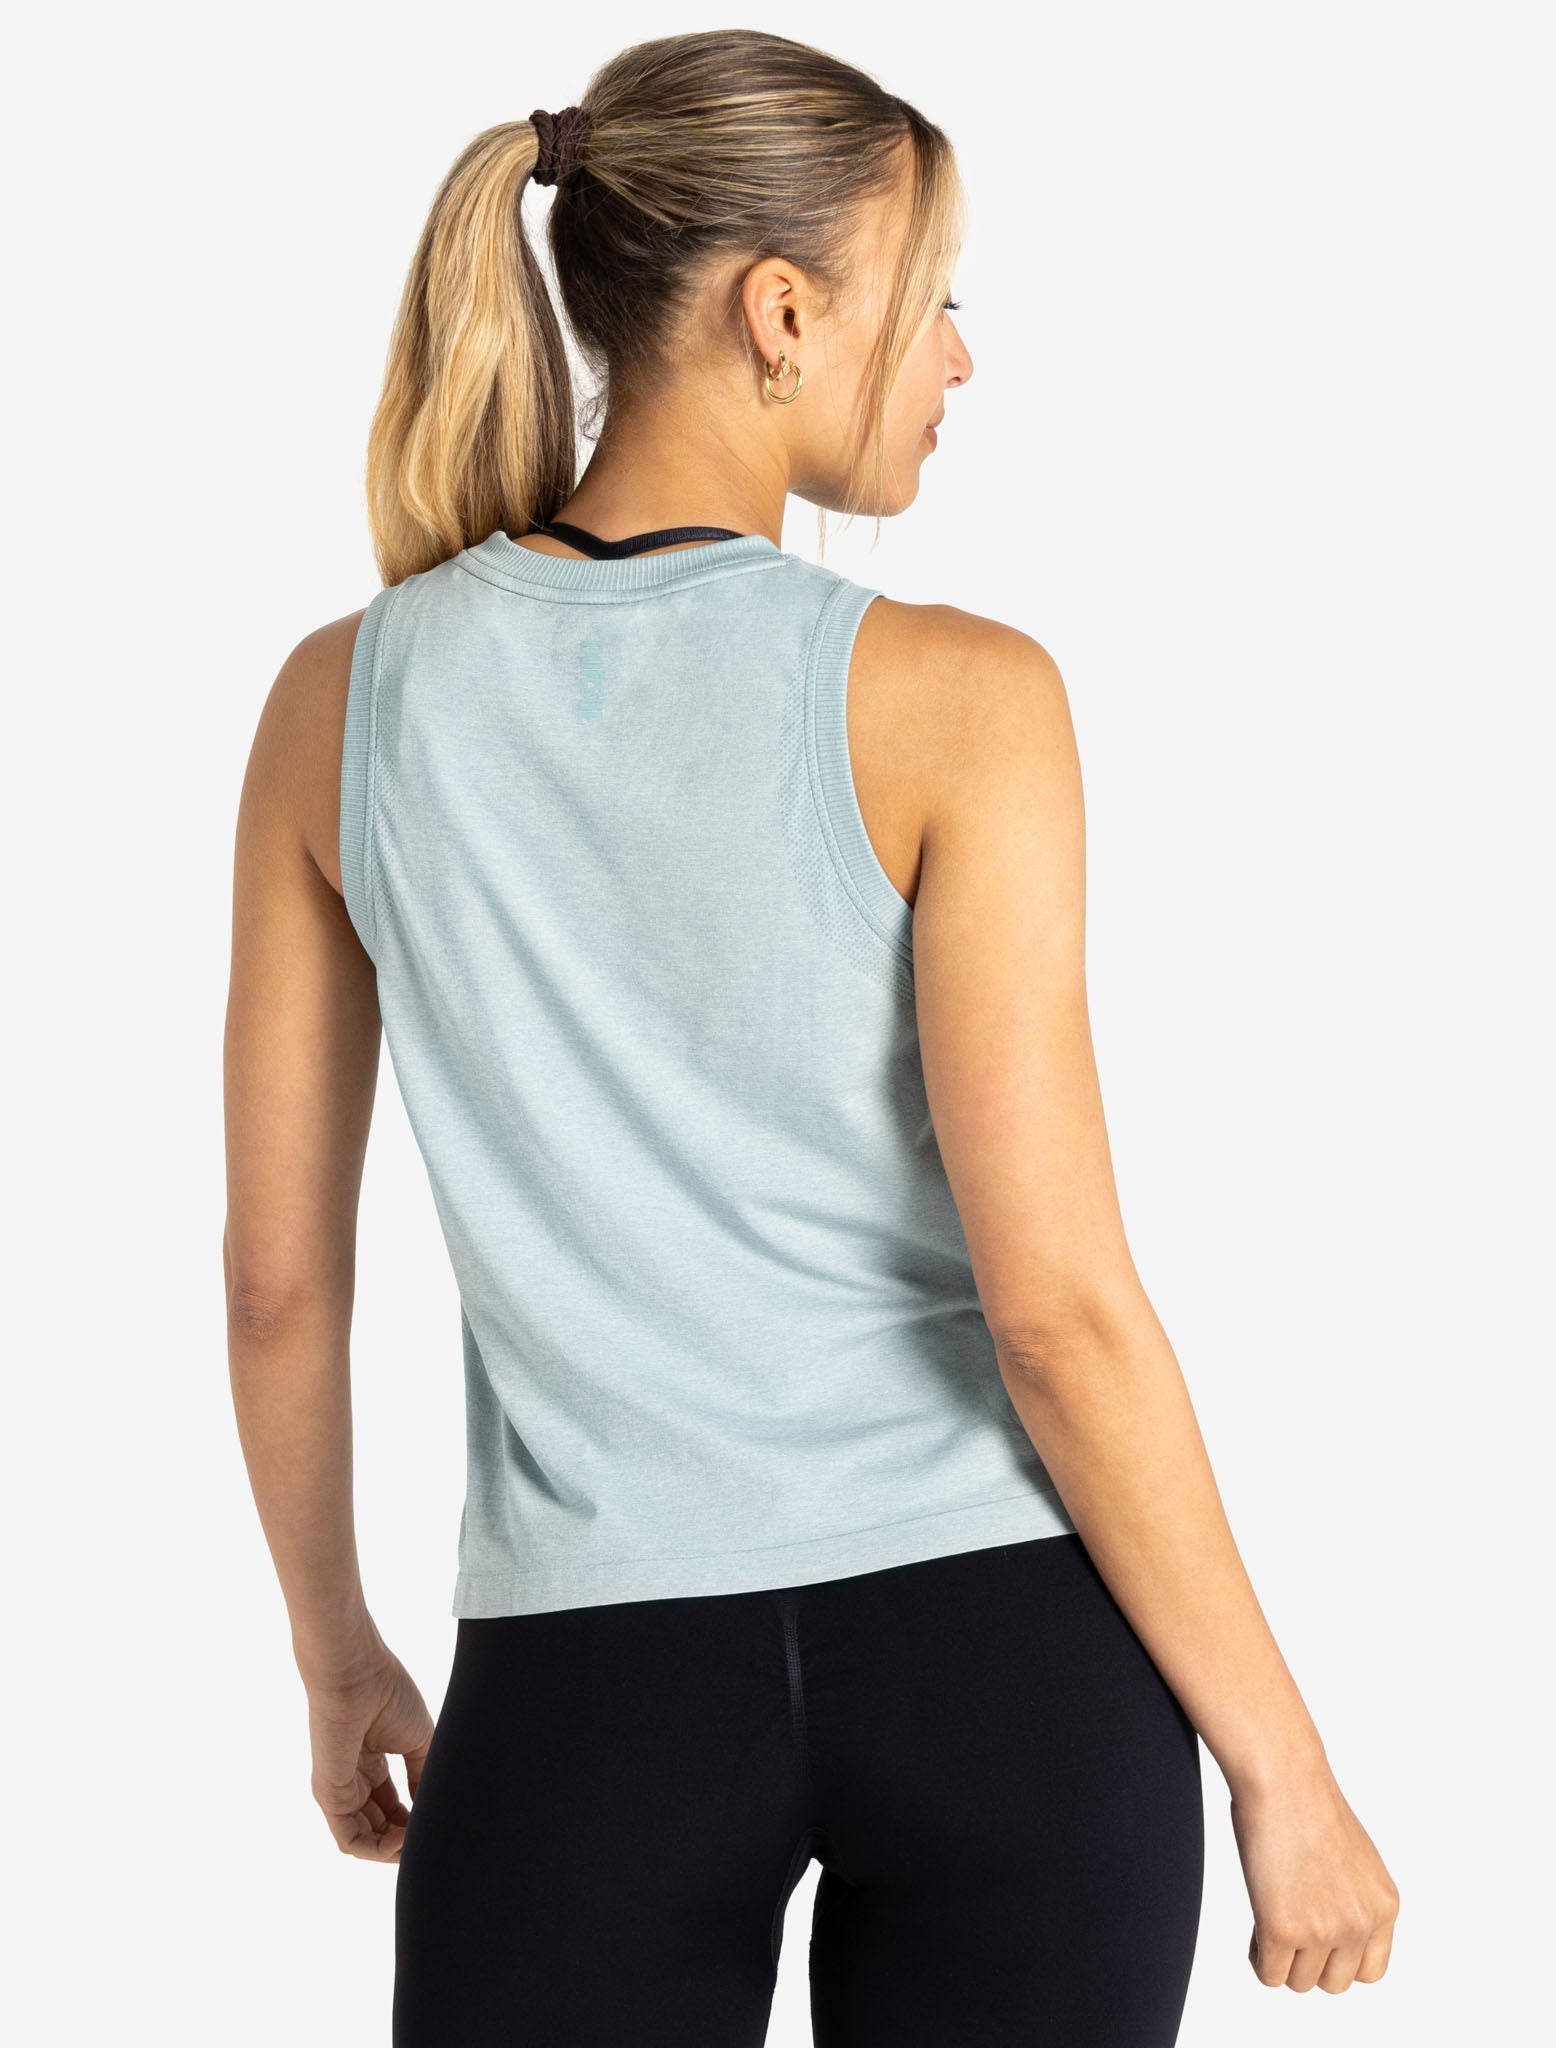 Women's Gym Vests, Workout Tops